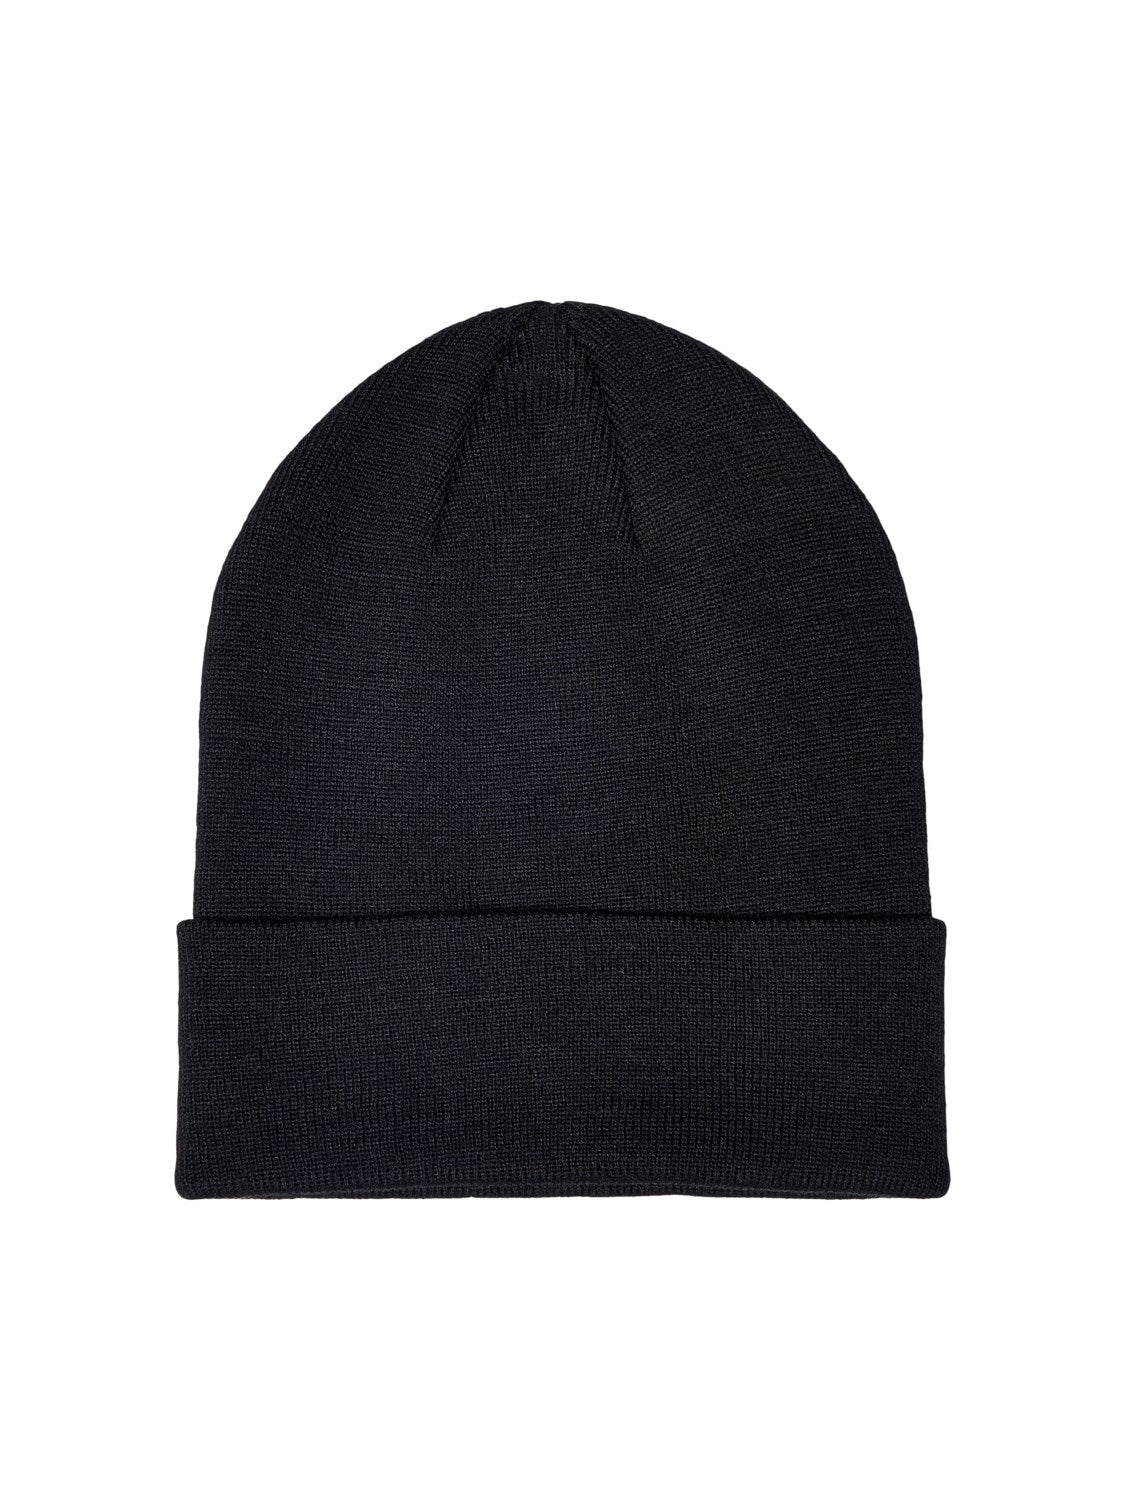 BASIC BEANIE ONLY, 5 colors 